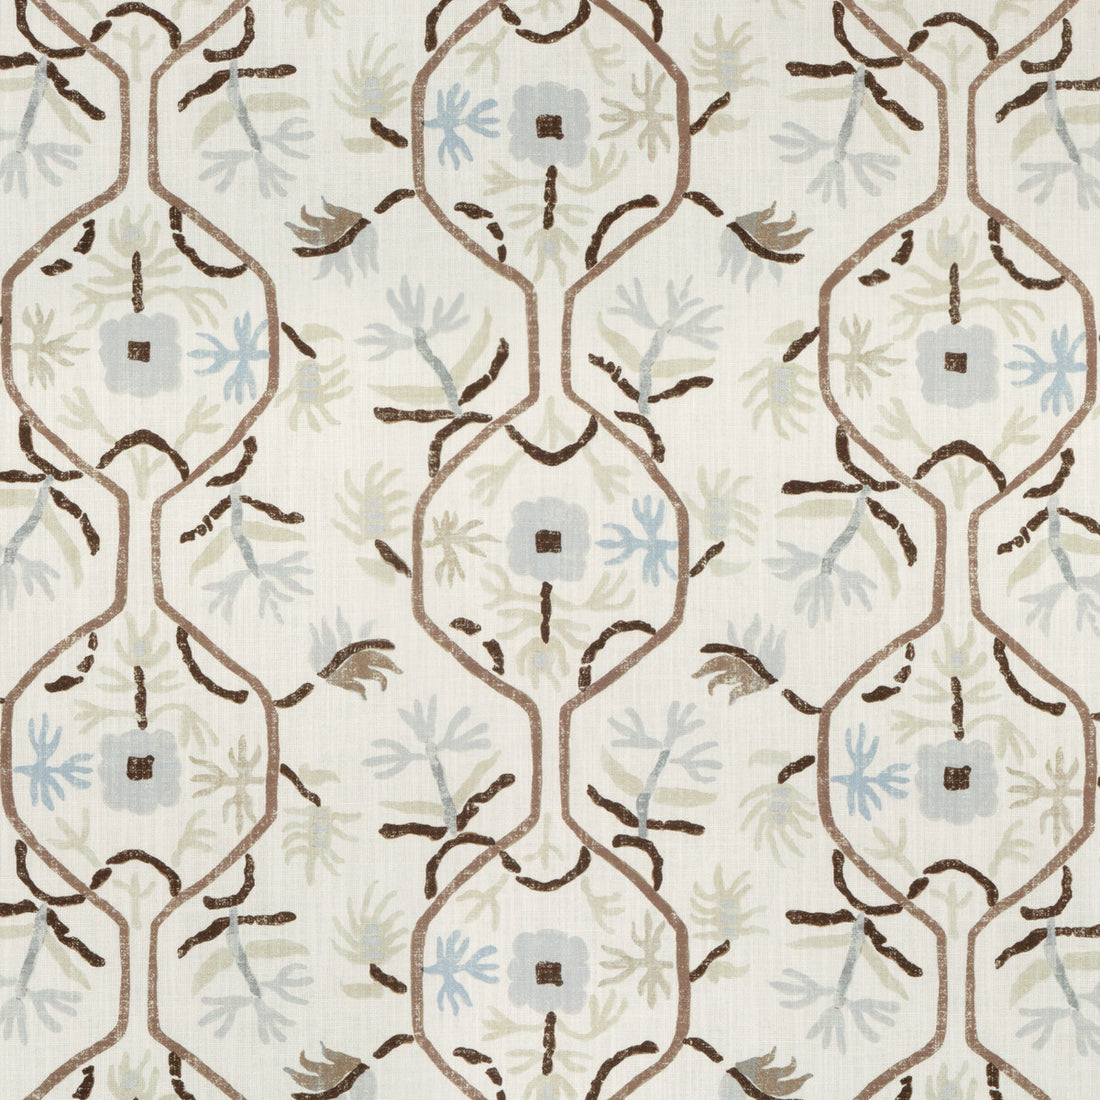 Le Jasmin Print fabric in pumice color - pattern 8024110.1611.0 - by Brunschwig &amp; Fils in the Les Ensembliers L&